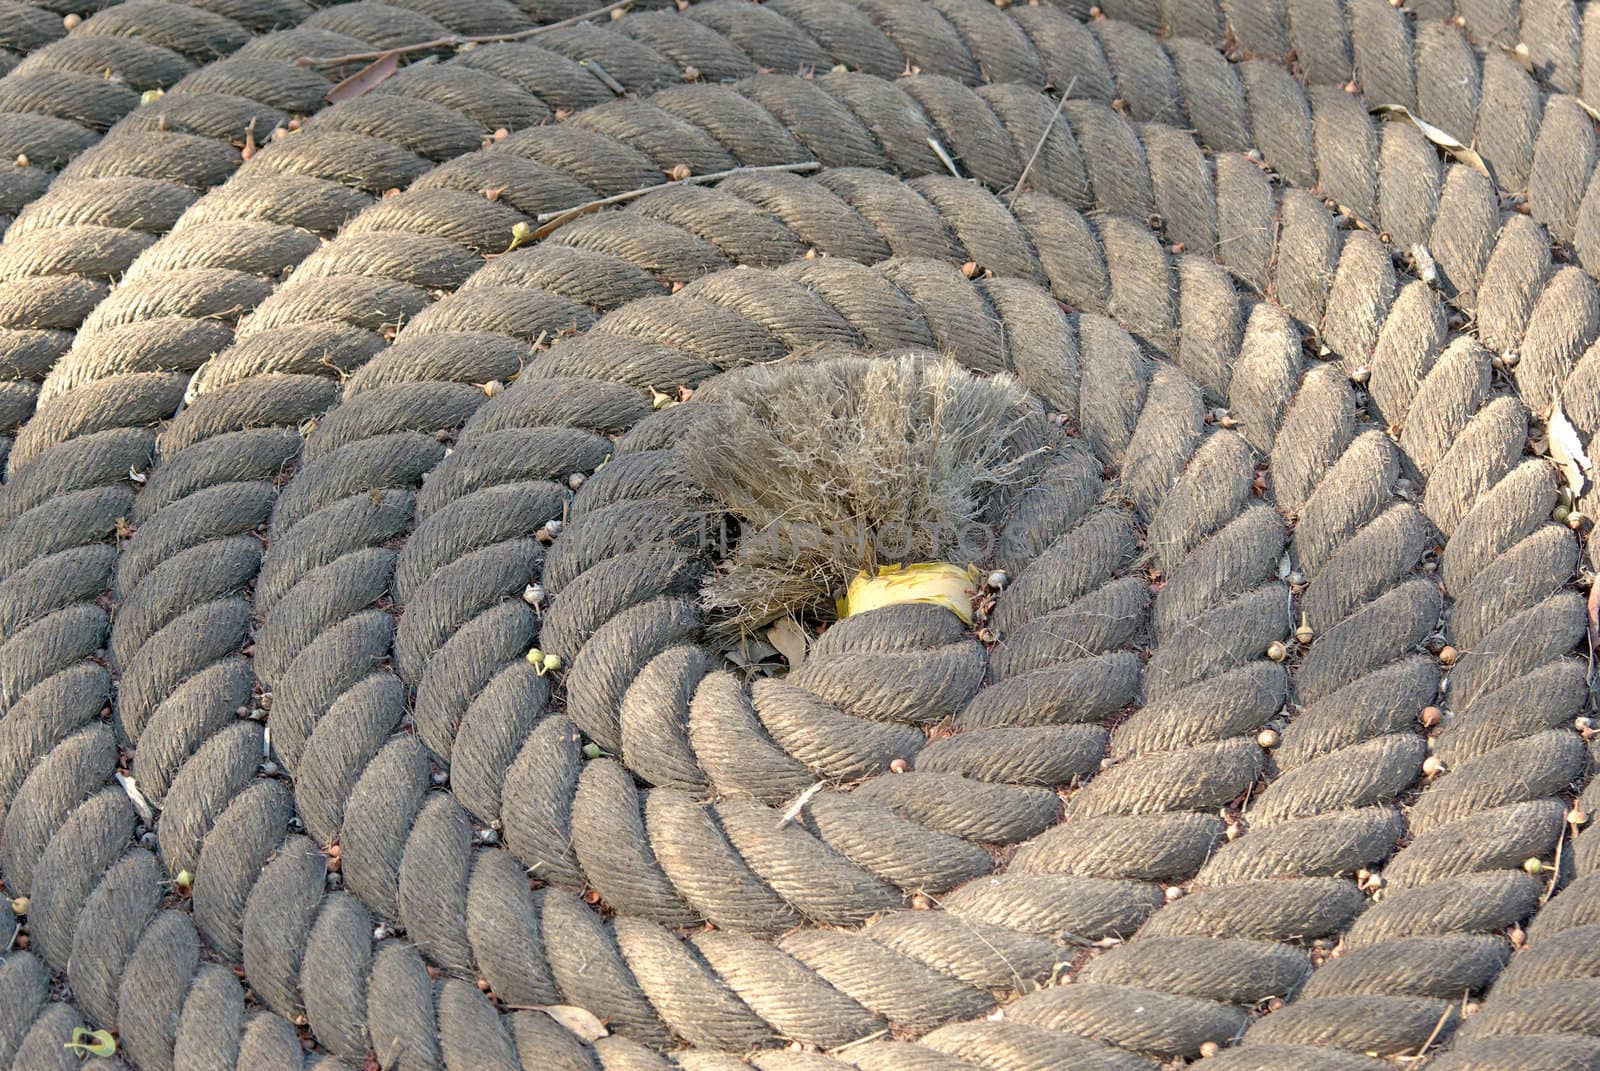 a big rope rolled into a tight coil